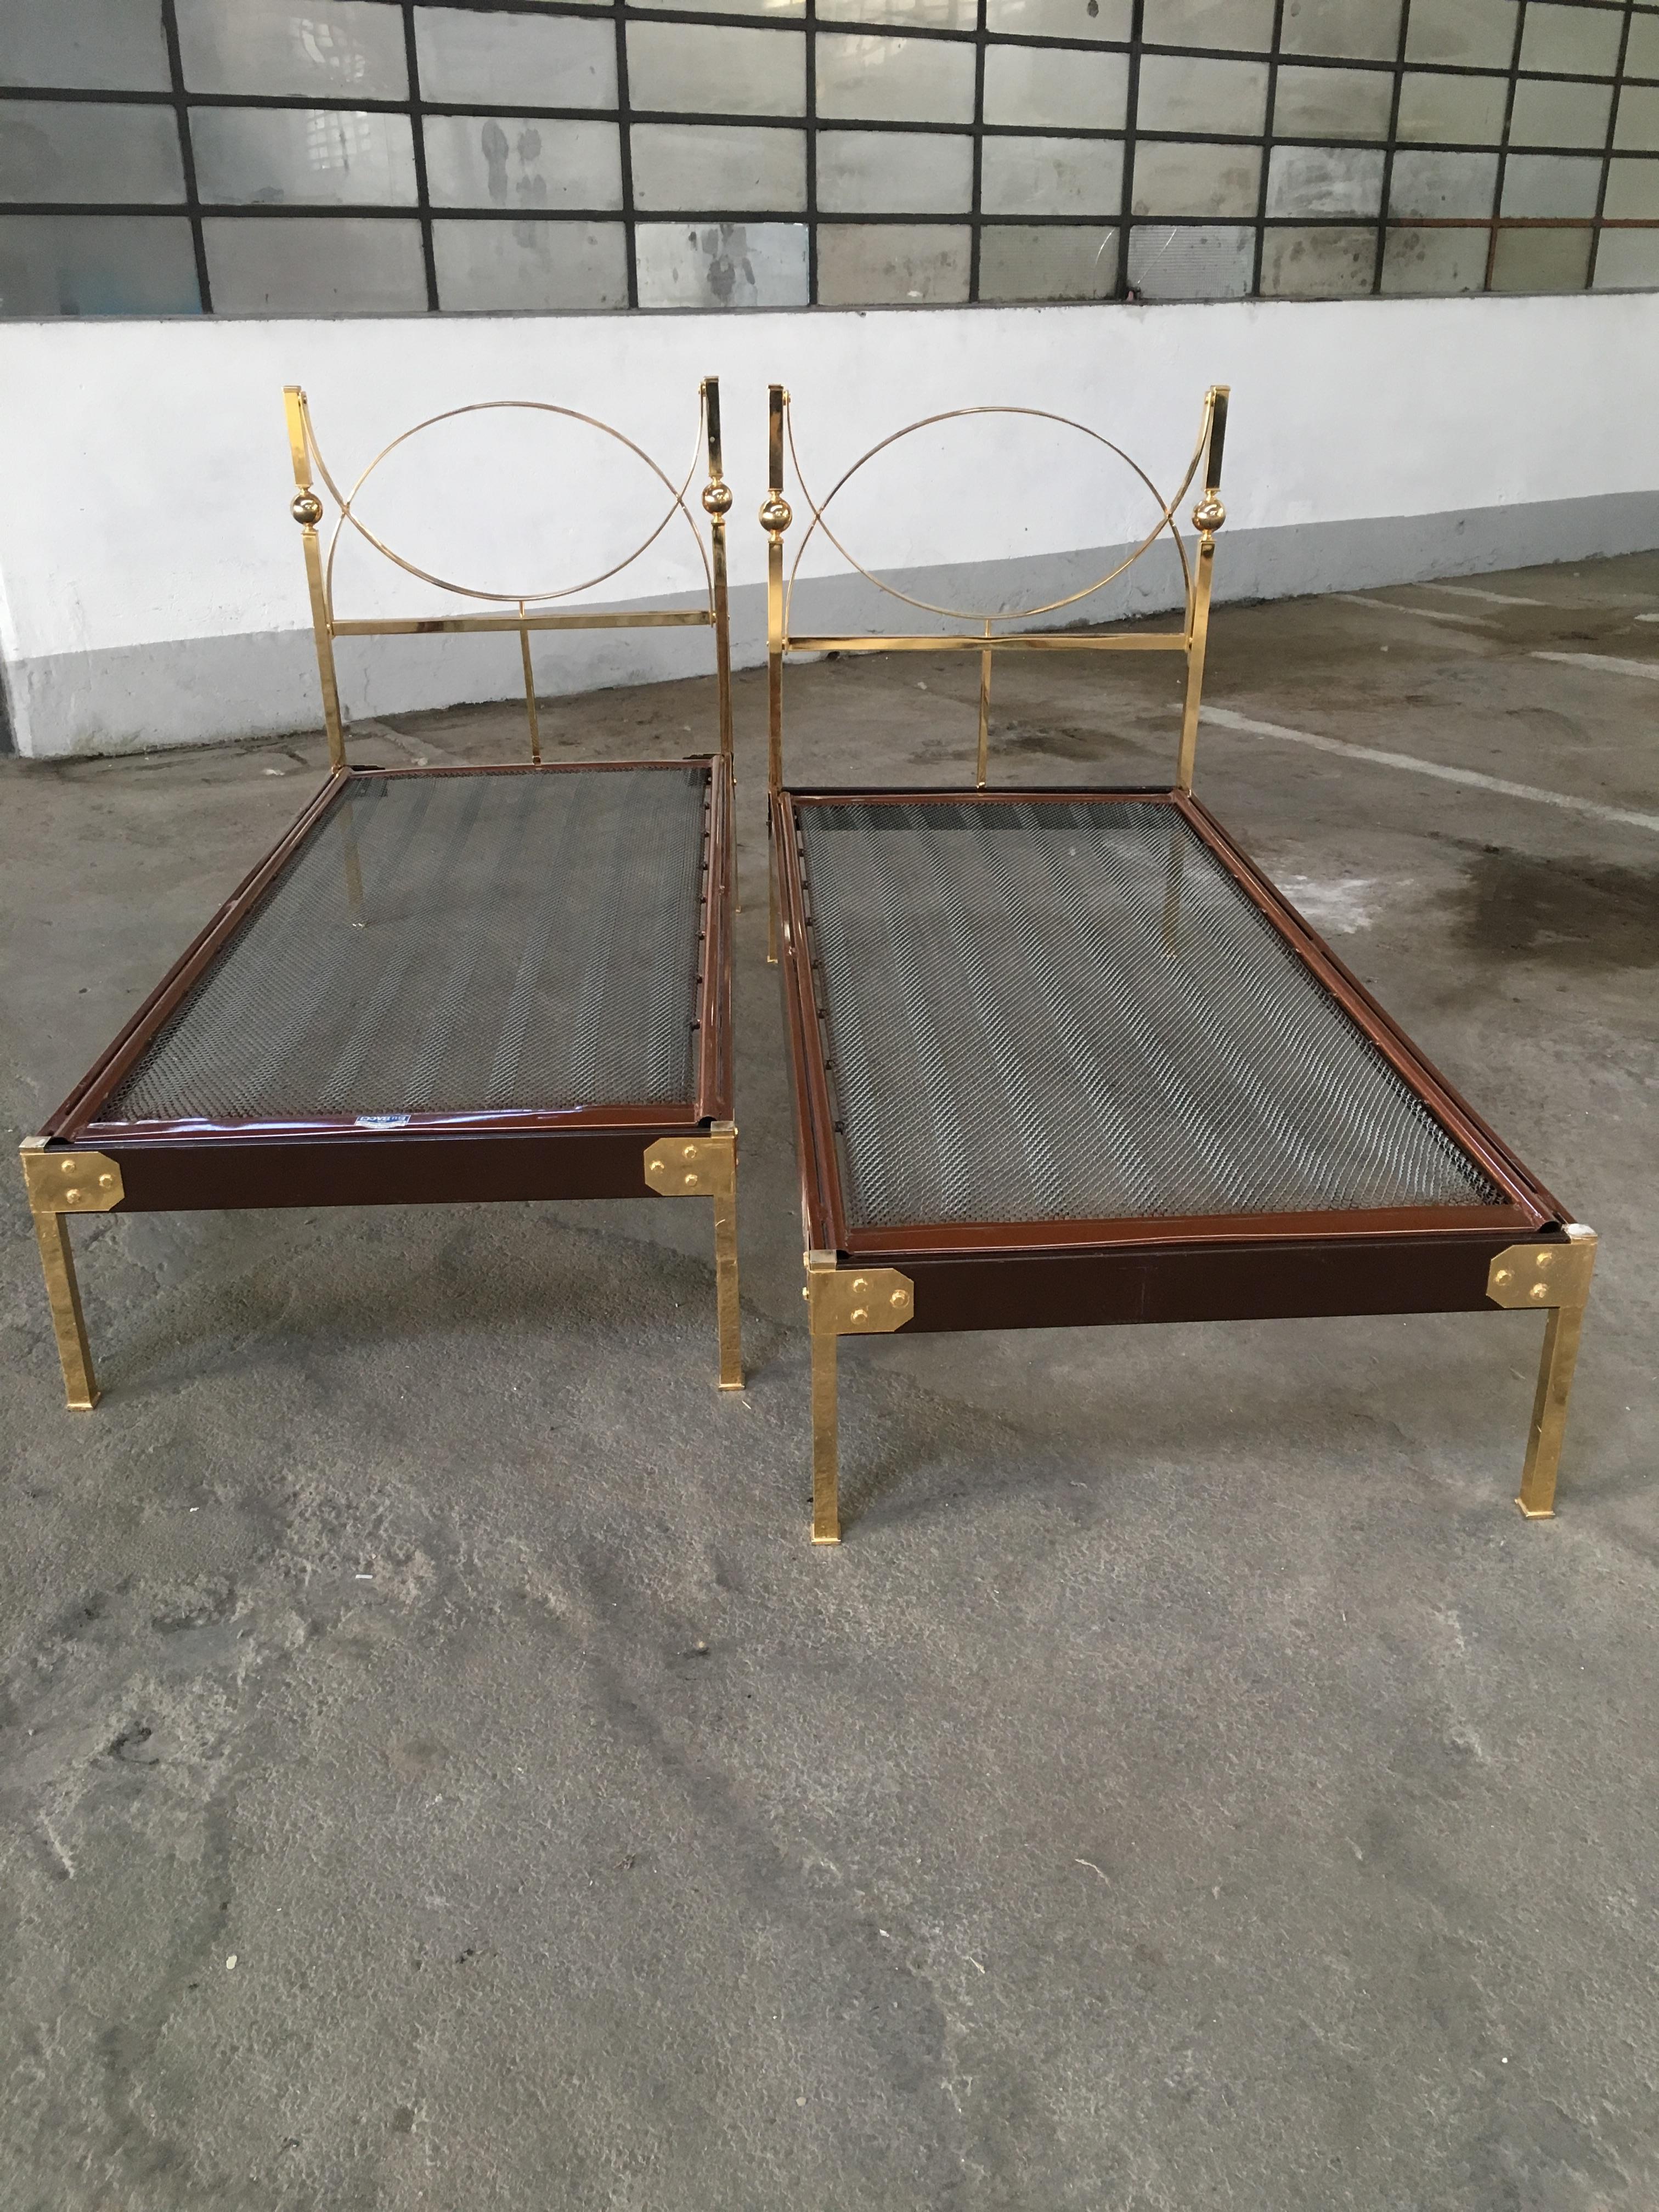 Mid-Century Modern pair of Italian single beds with gilt headboard and feet, 1960s
The beds need a mattress of cm. 80 x 190.
One of the bed misses a short bar under the headboard. In case of sell a brand new one will be provided.

 